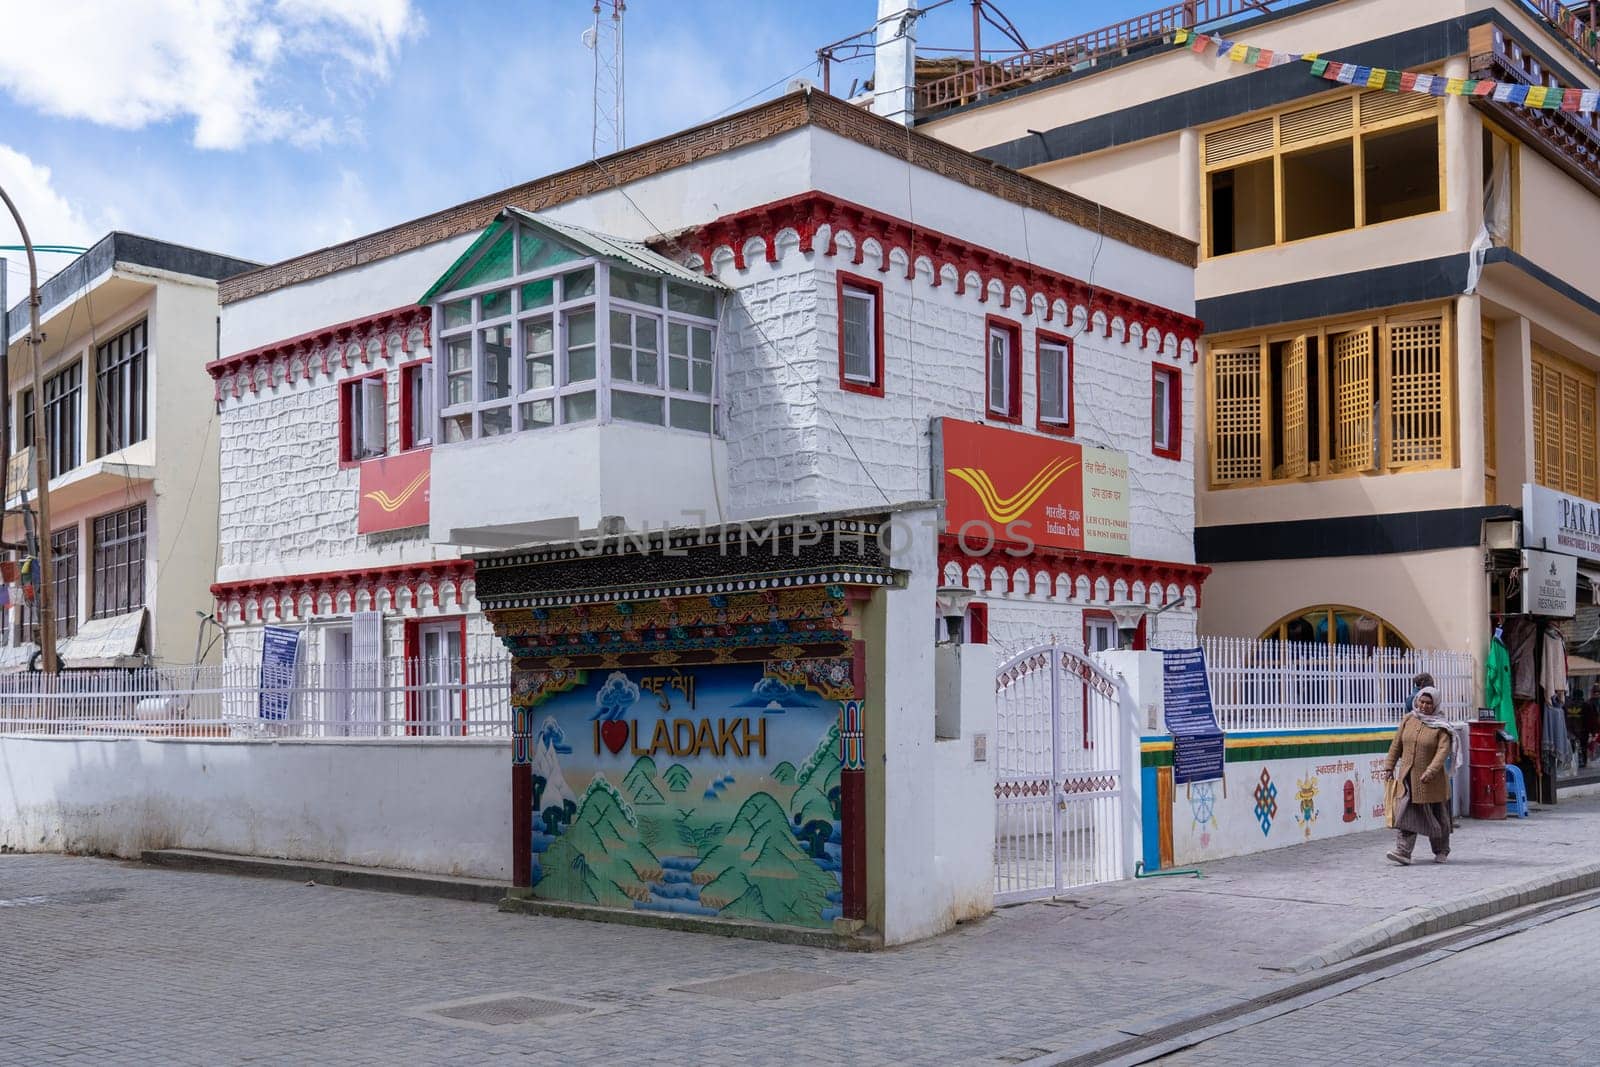 Post office in Leh, India by oliverfoerstner